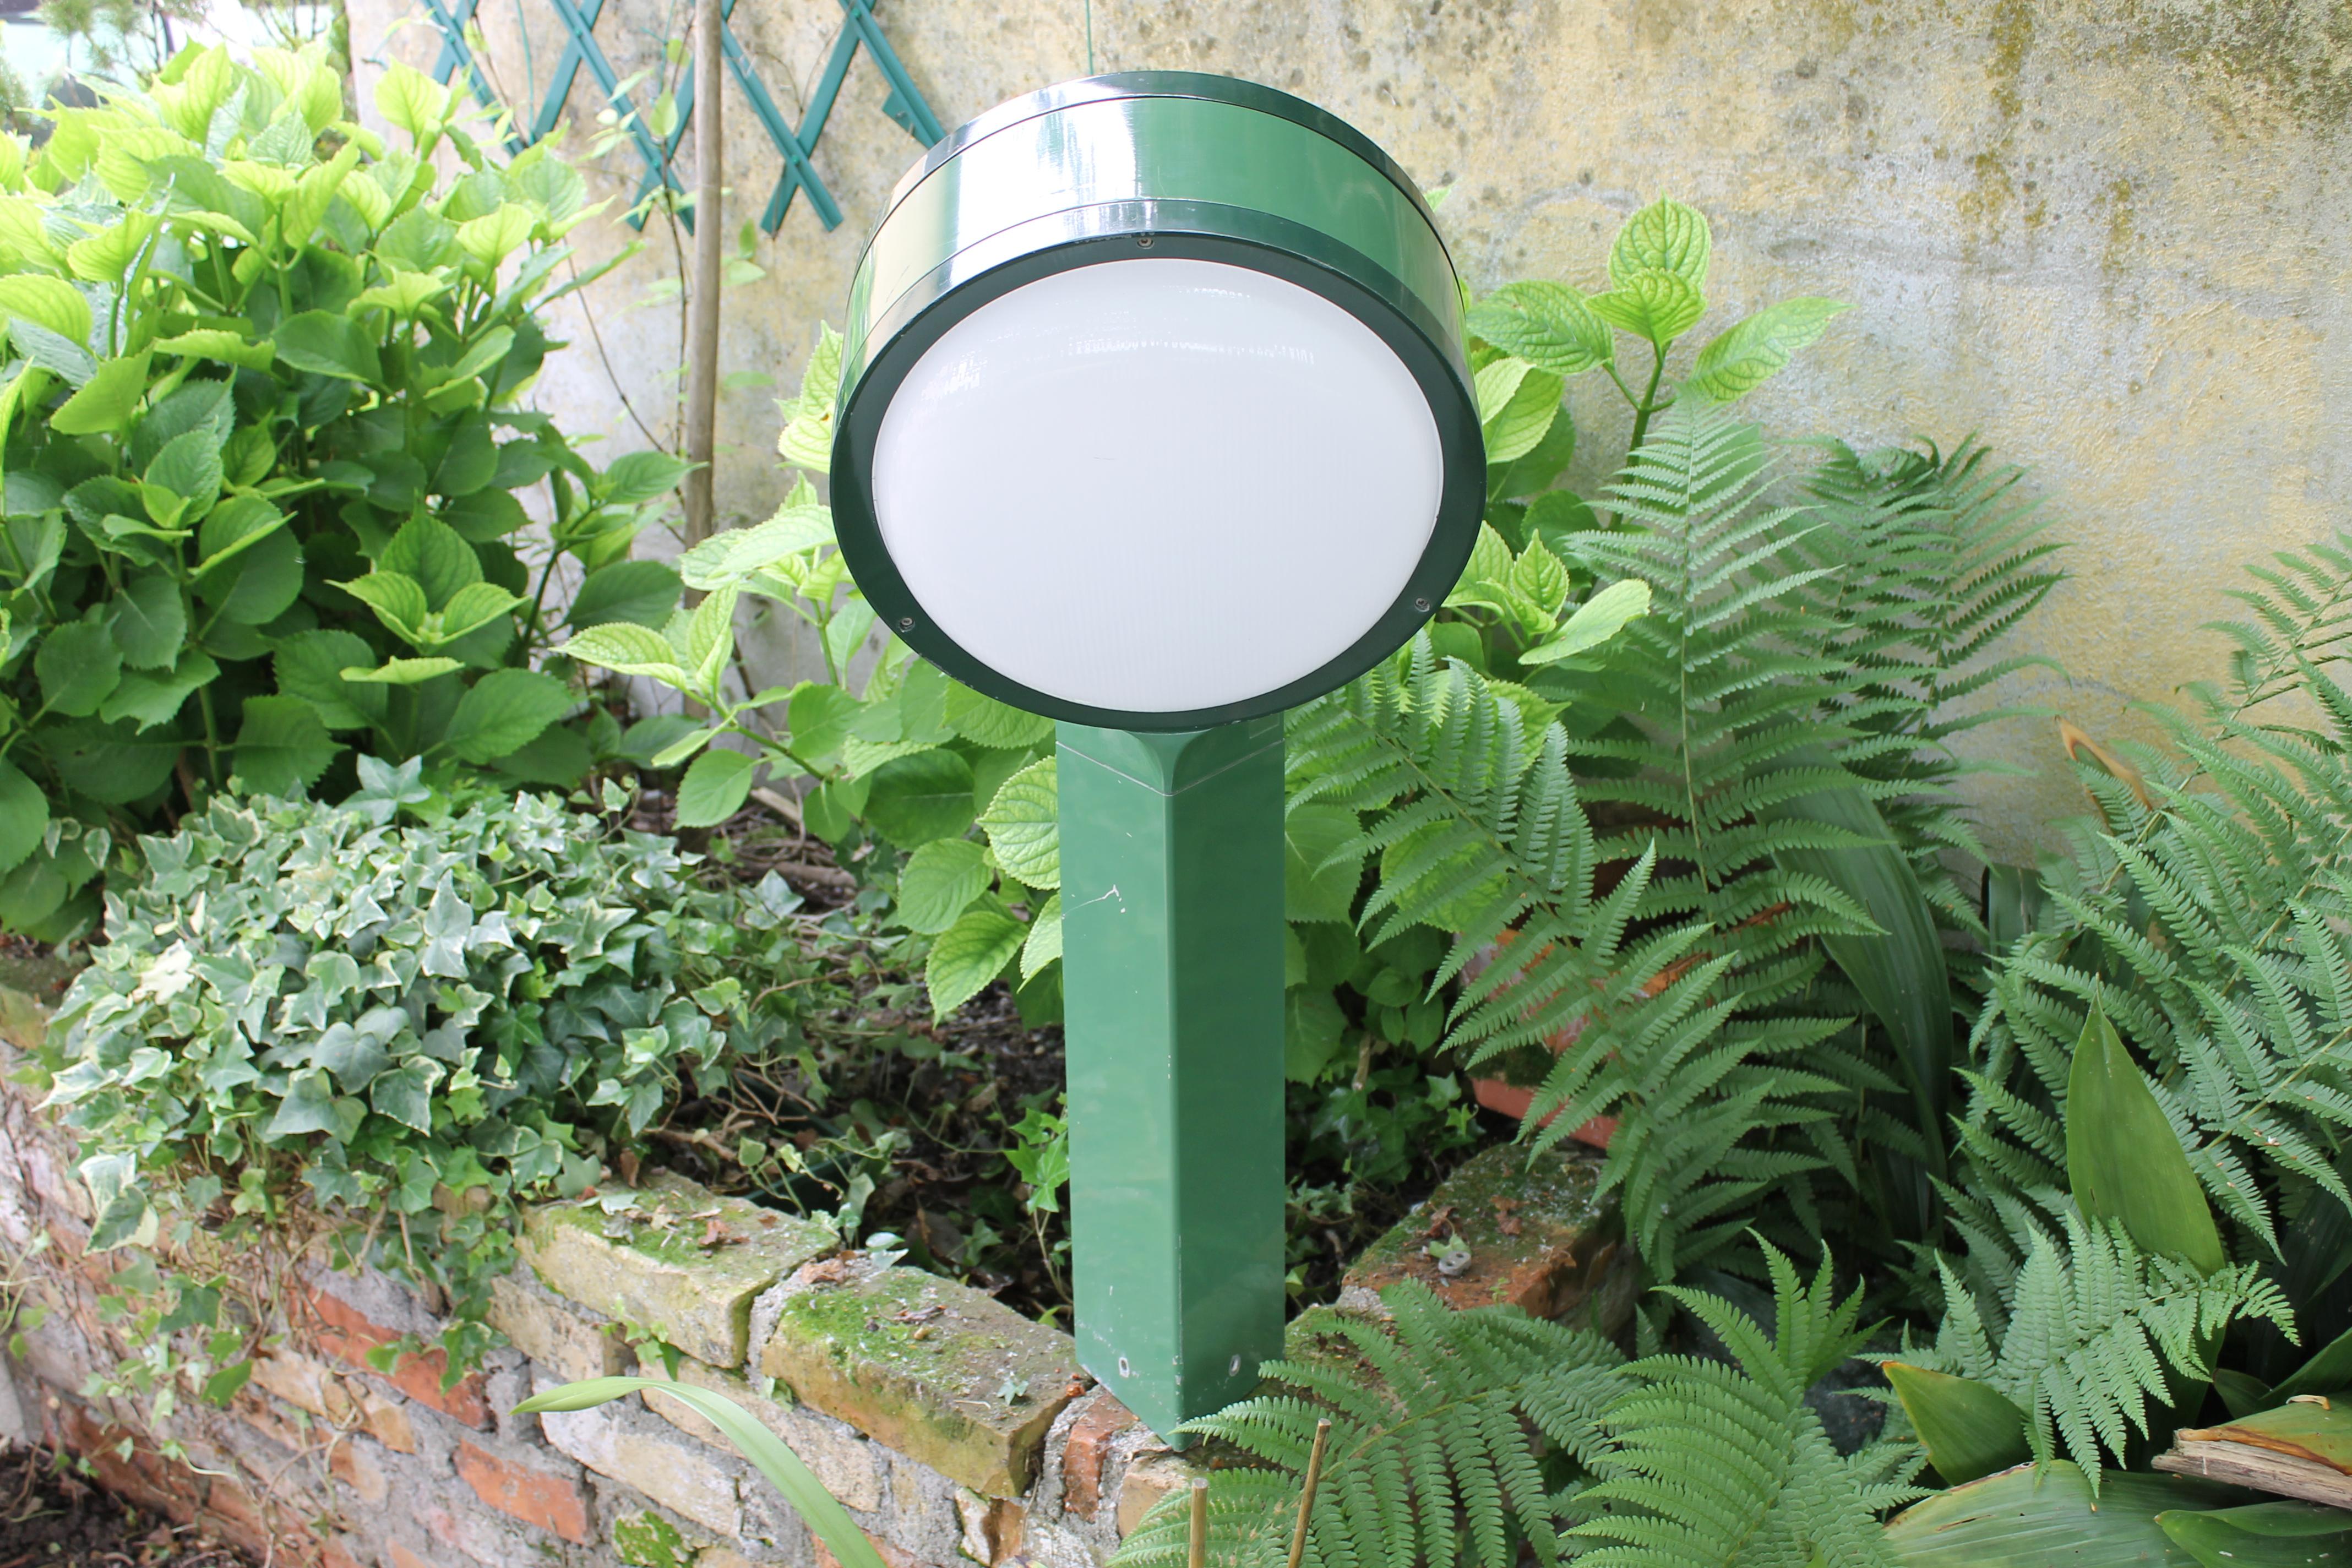 Flos Tamburo is a series of Classic outdoor lighting fixtures. A beautiful light which is is ideal for the patio or outdoor walking areas and entrances. Finished in green metal with a plastic lens diffuser. Designed by Tobia Scarpa in 1973, made in